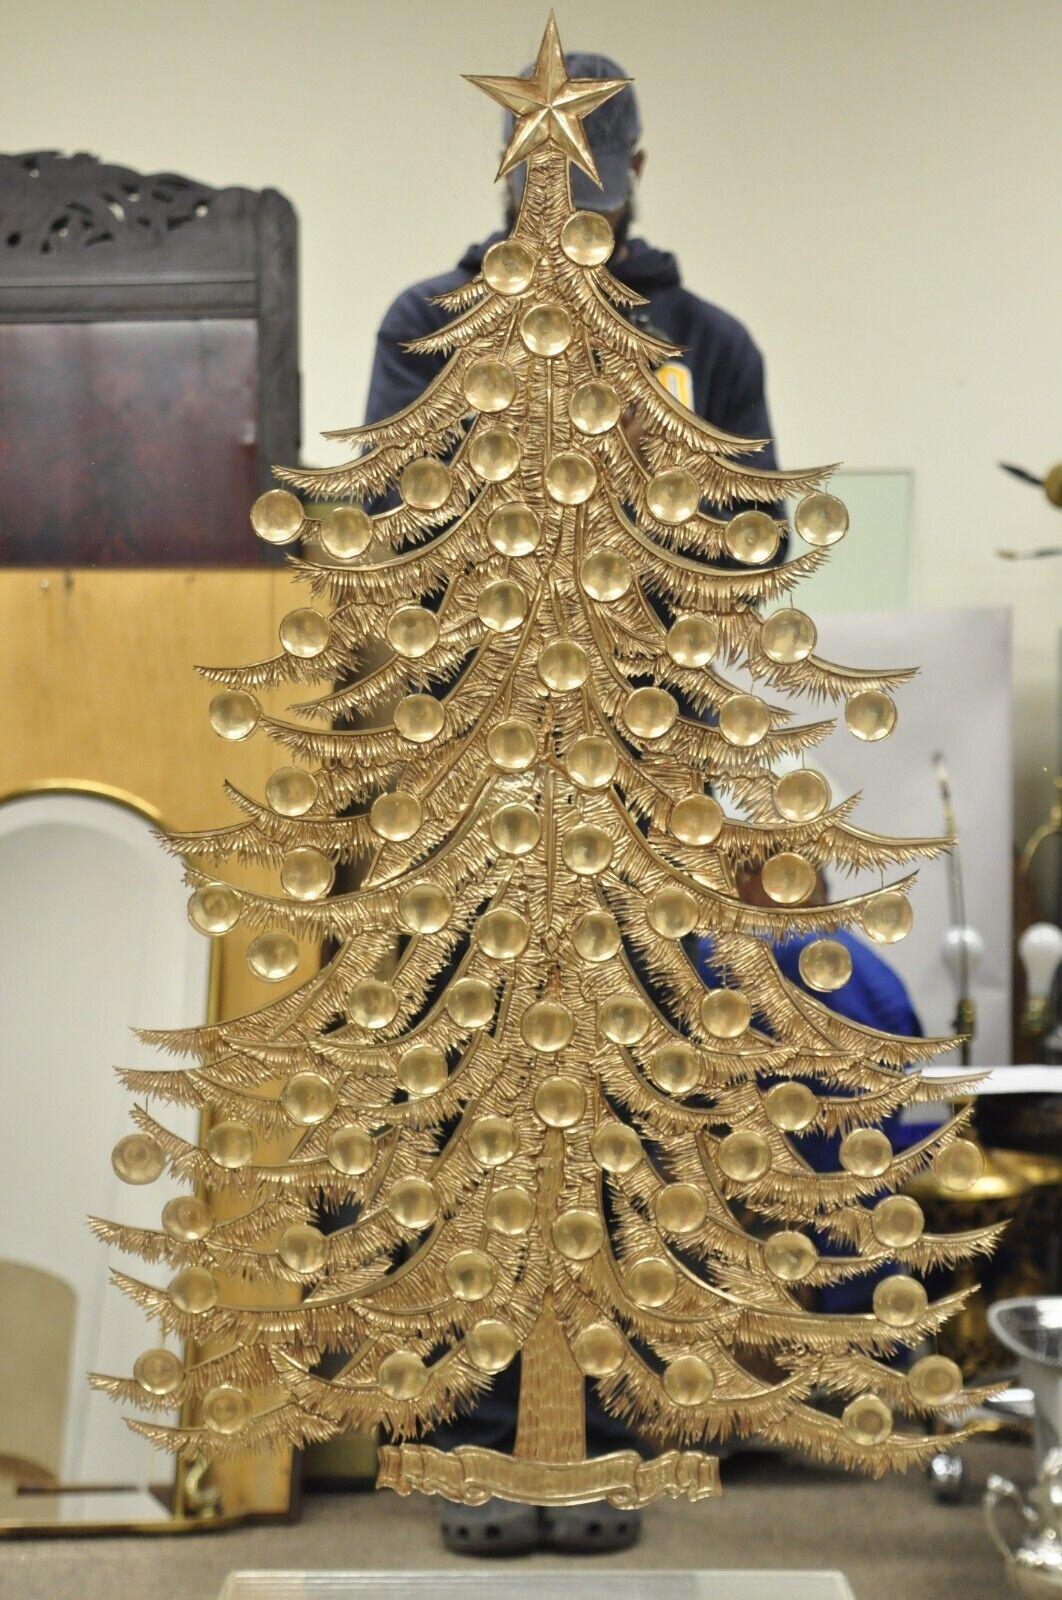 Mid-Century Modern Sharon Art Reliable Mfg. Wall art mirror gold christmas tree. Item features reflective mirror sides, lighted interior (single light), gold gilt Christmas tree design, original label, very nice vintage item, clean modernist lines,